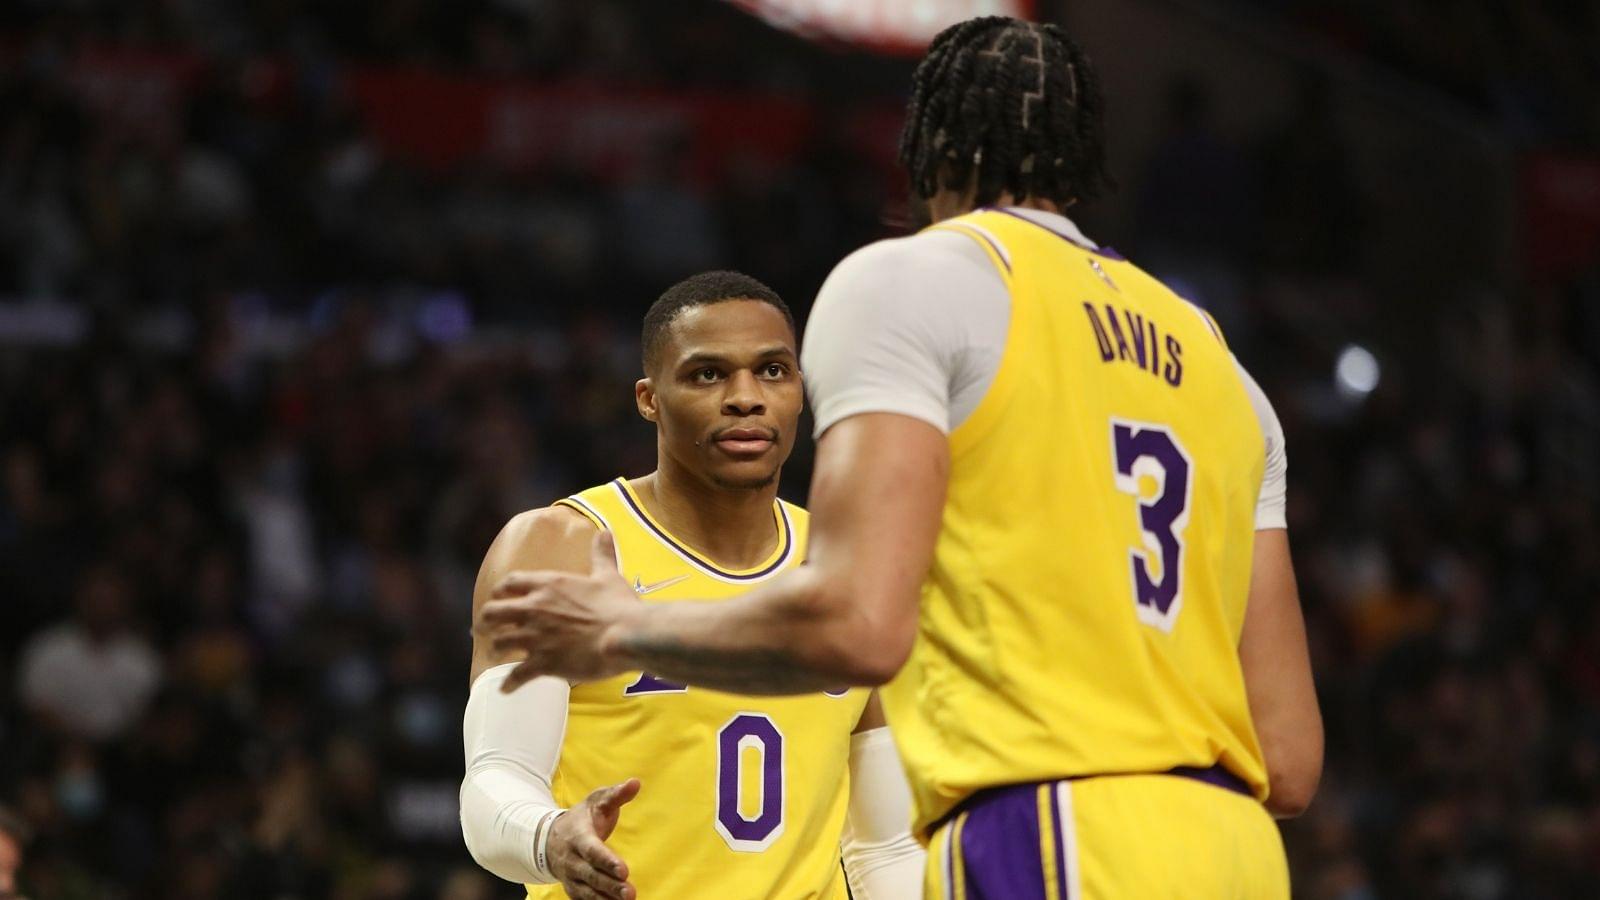 "We don’t care if you miss everything Russell Westbrook, just play!!!": Anthony Davis and Frank Vogel have separate views on the Lakers point guard after a disastrous game against the Knicks